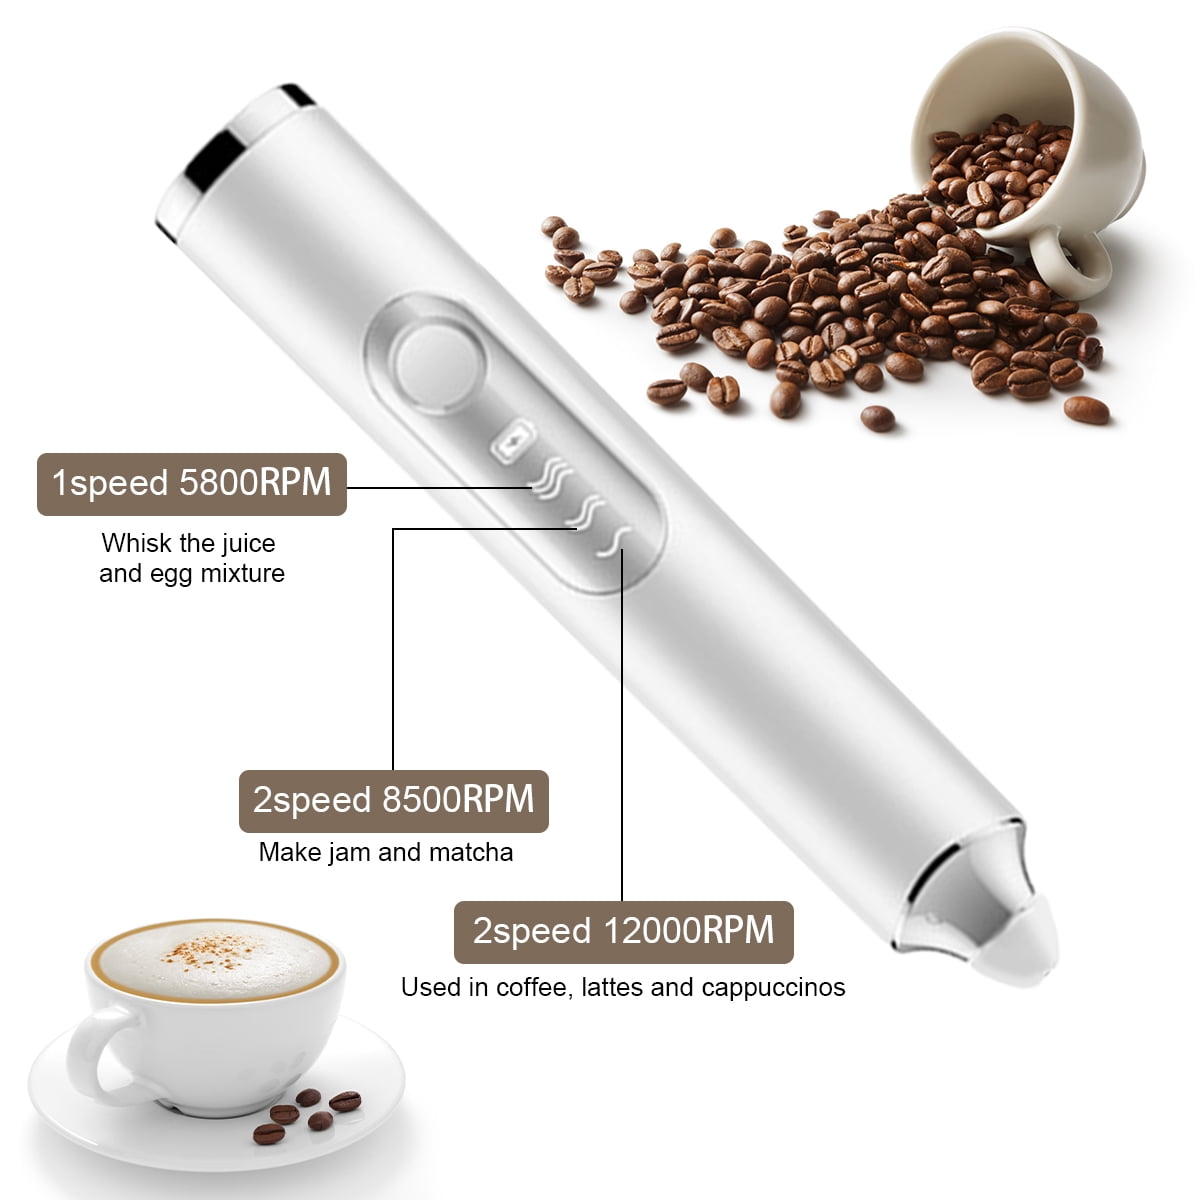 Wireless Mini Electric Milk Foamer Blender Handheld Coffee Whisk Mixer For  Egg Beating And Cappuccino Frother Kitchen Whist Tool Wholesale From  Idealhomes, $1.32